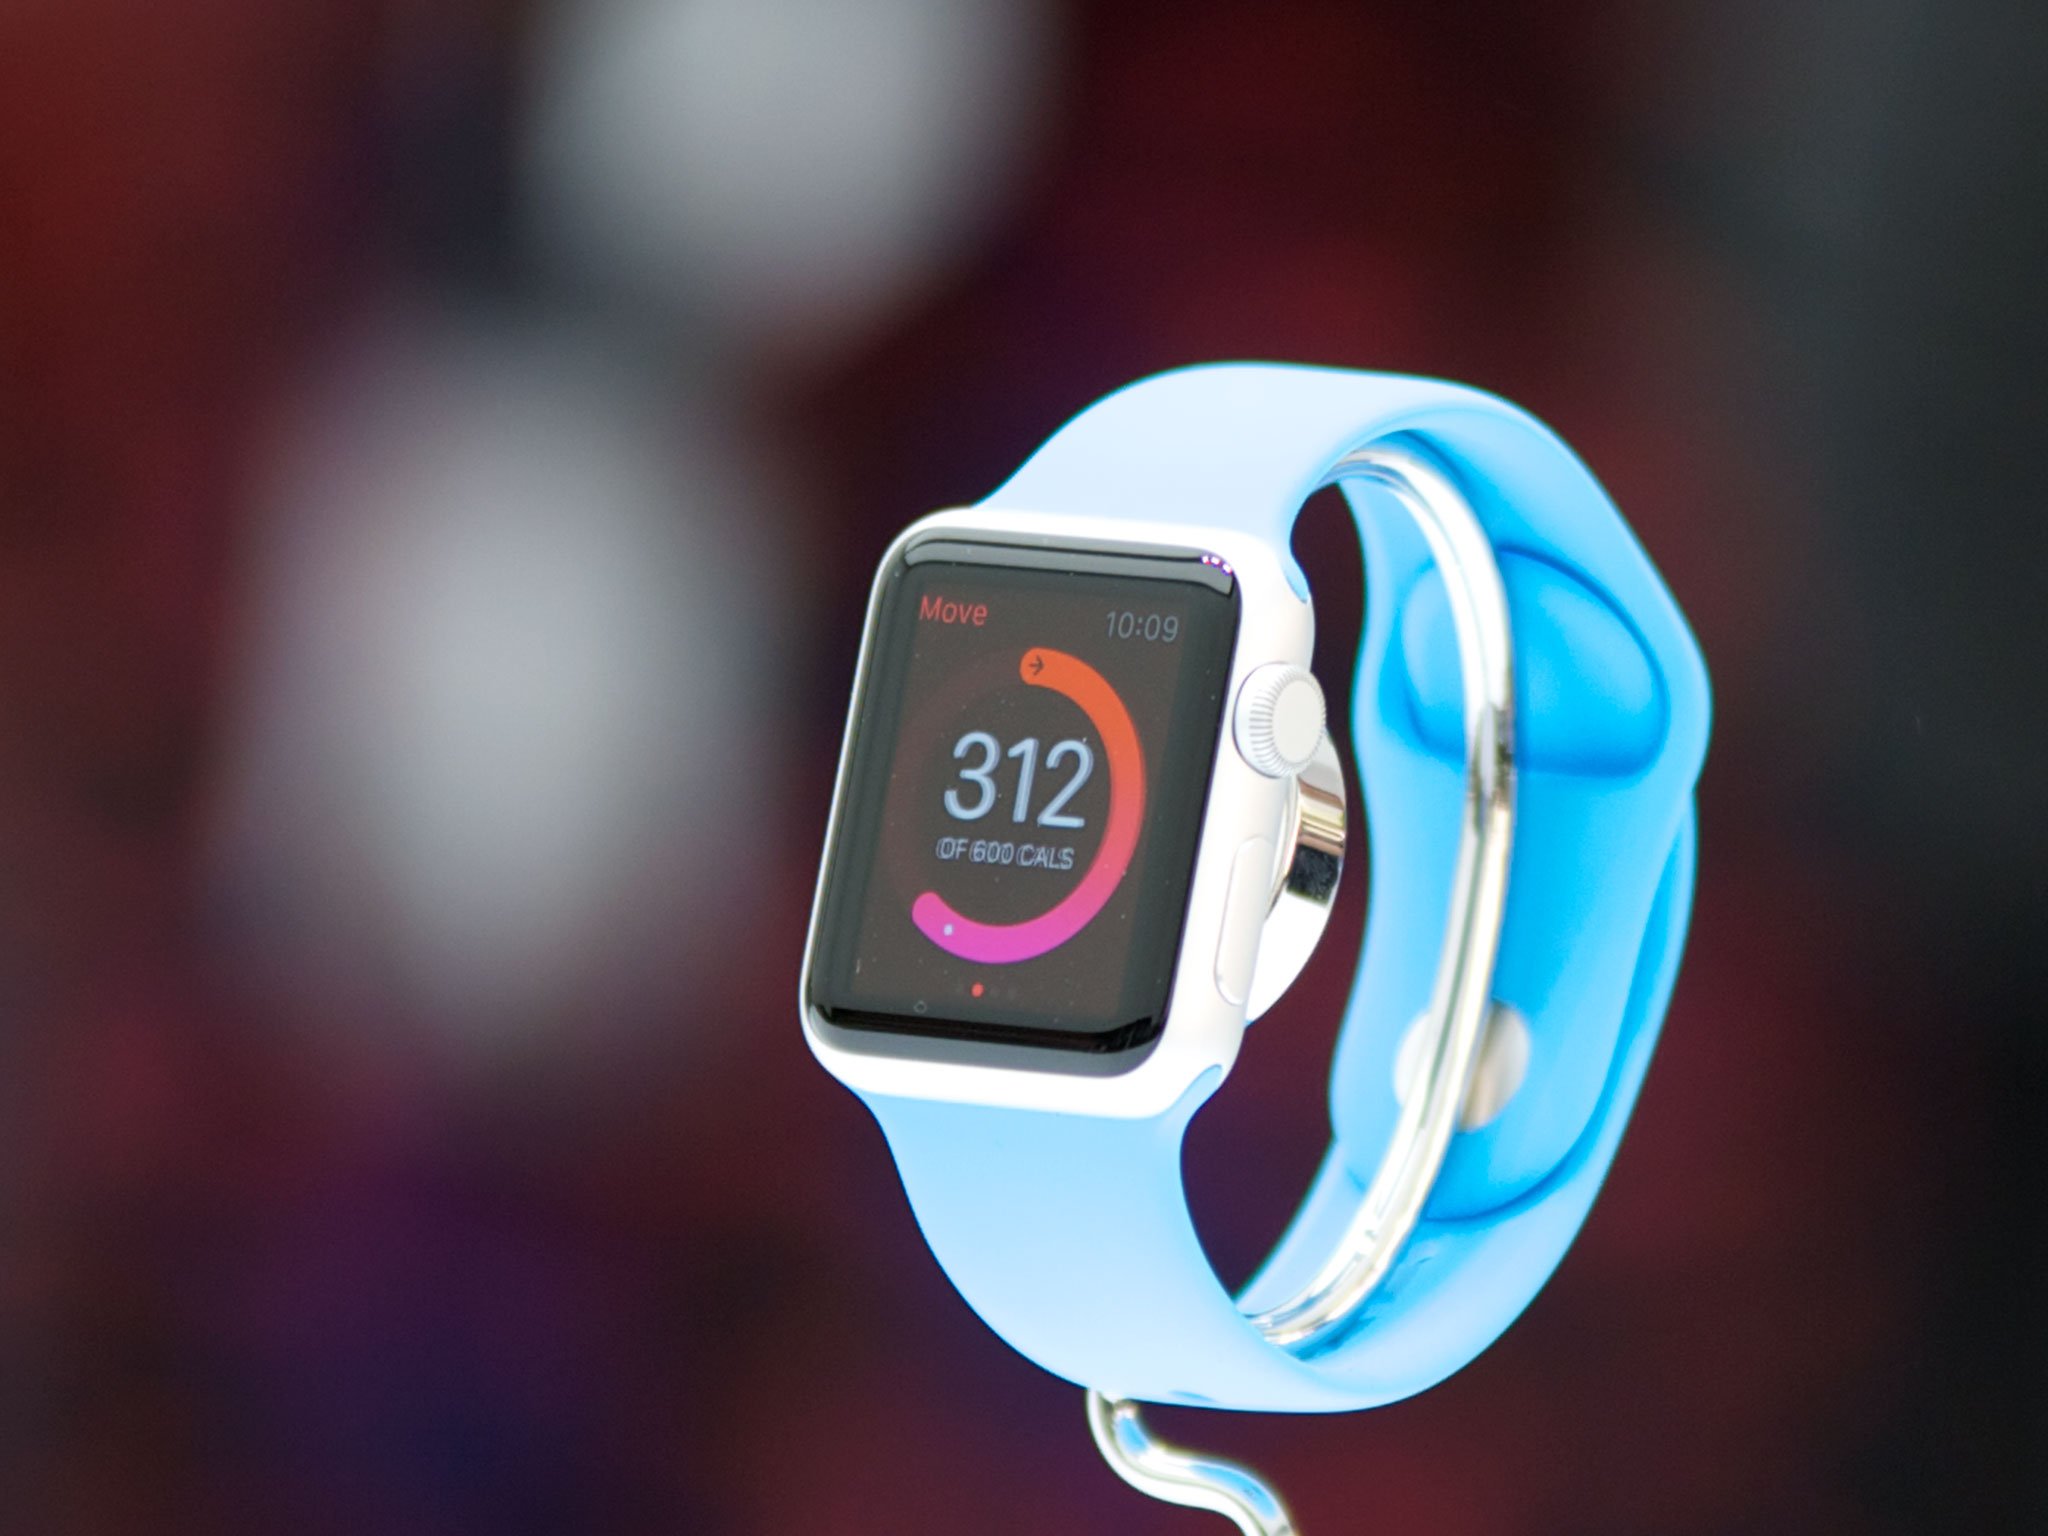 Apple Watch to ship with all previously announced health features